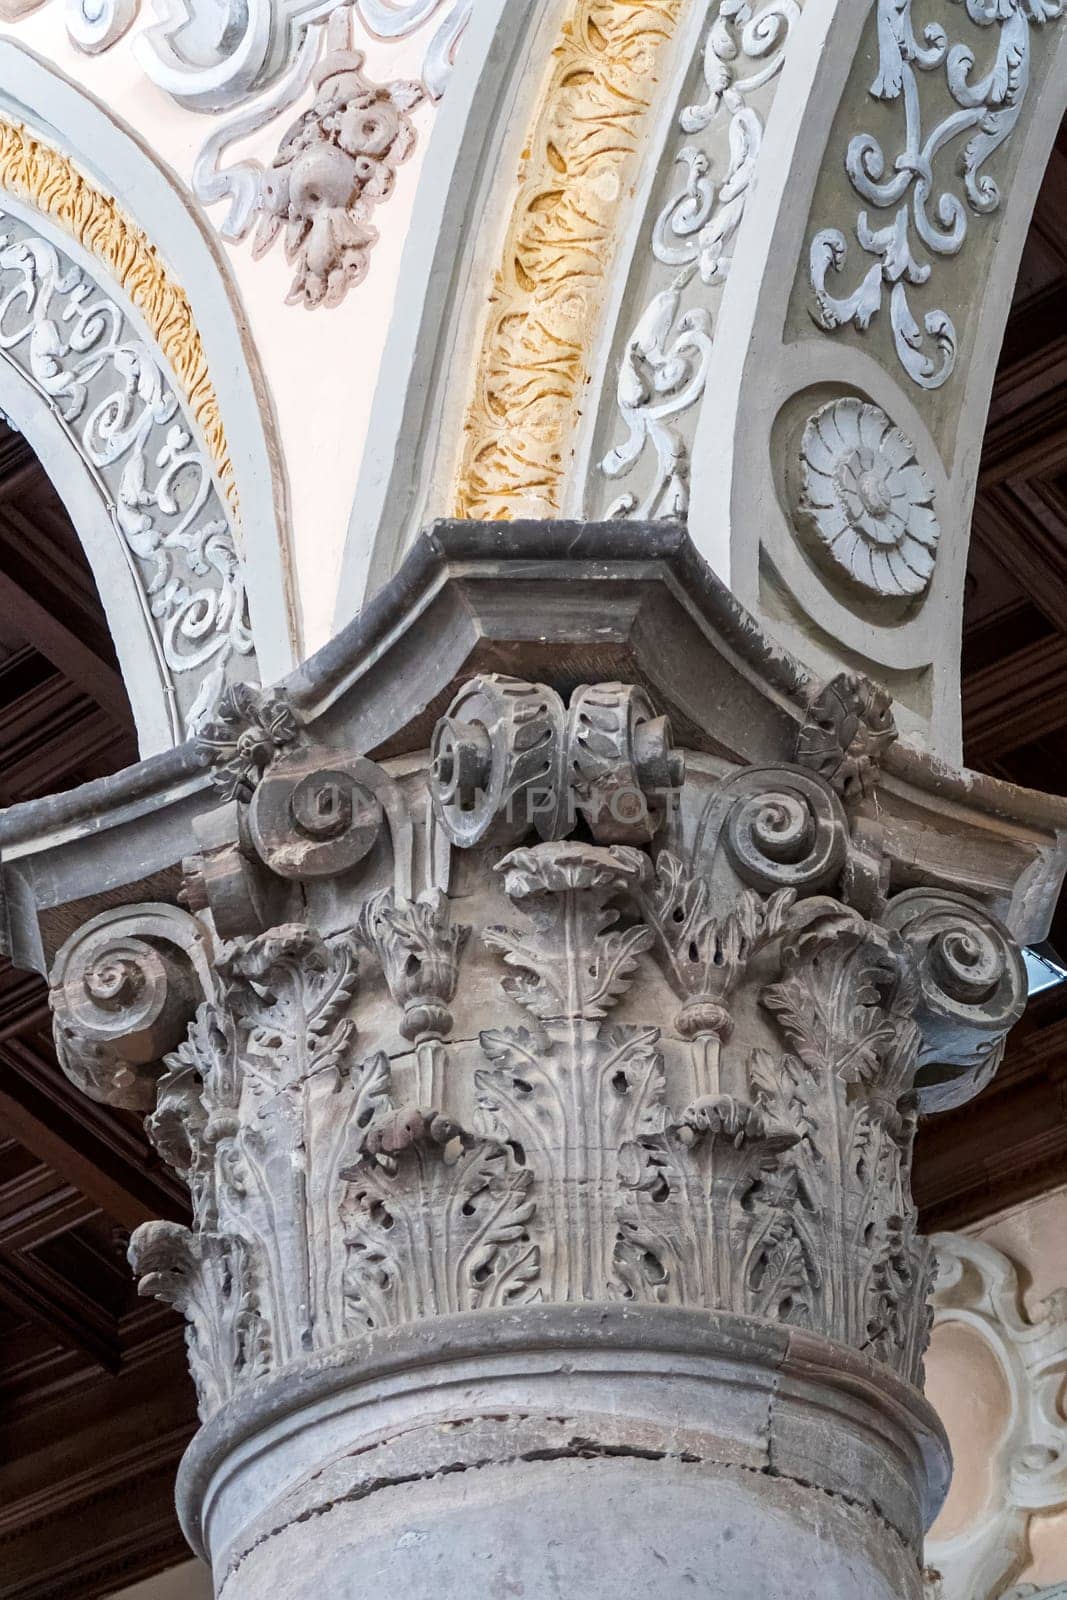 The capital of an old column in the church. Vertical view by EdVal